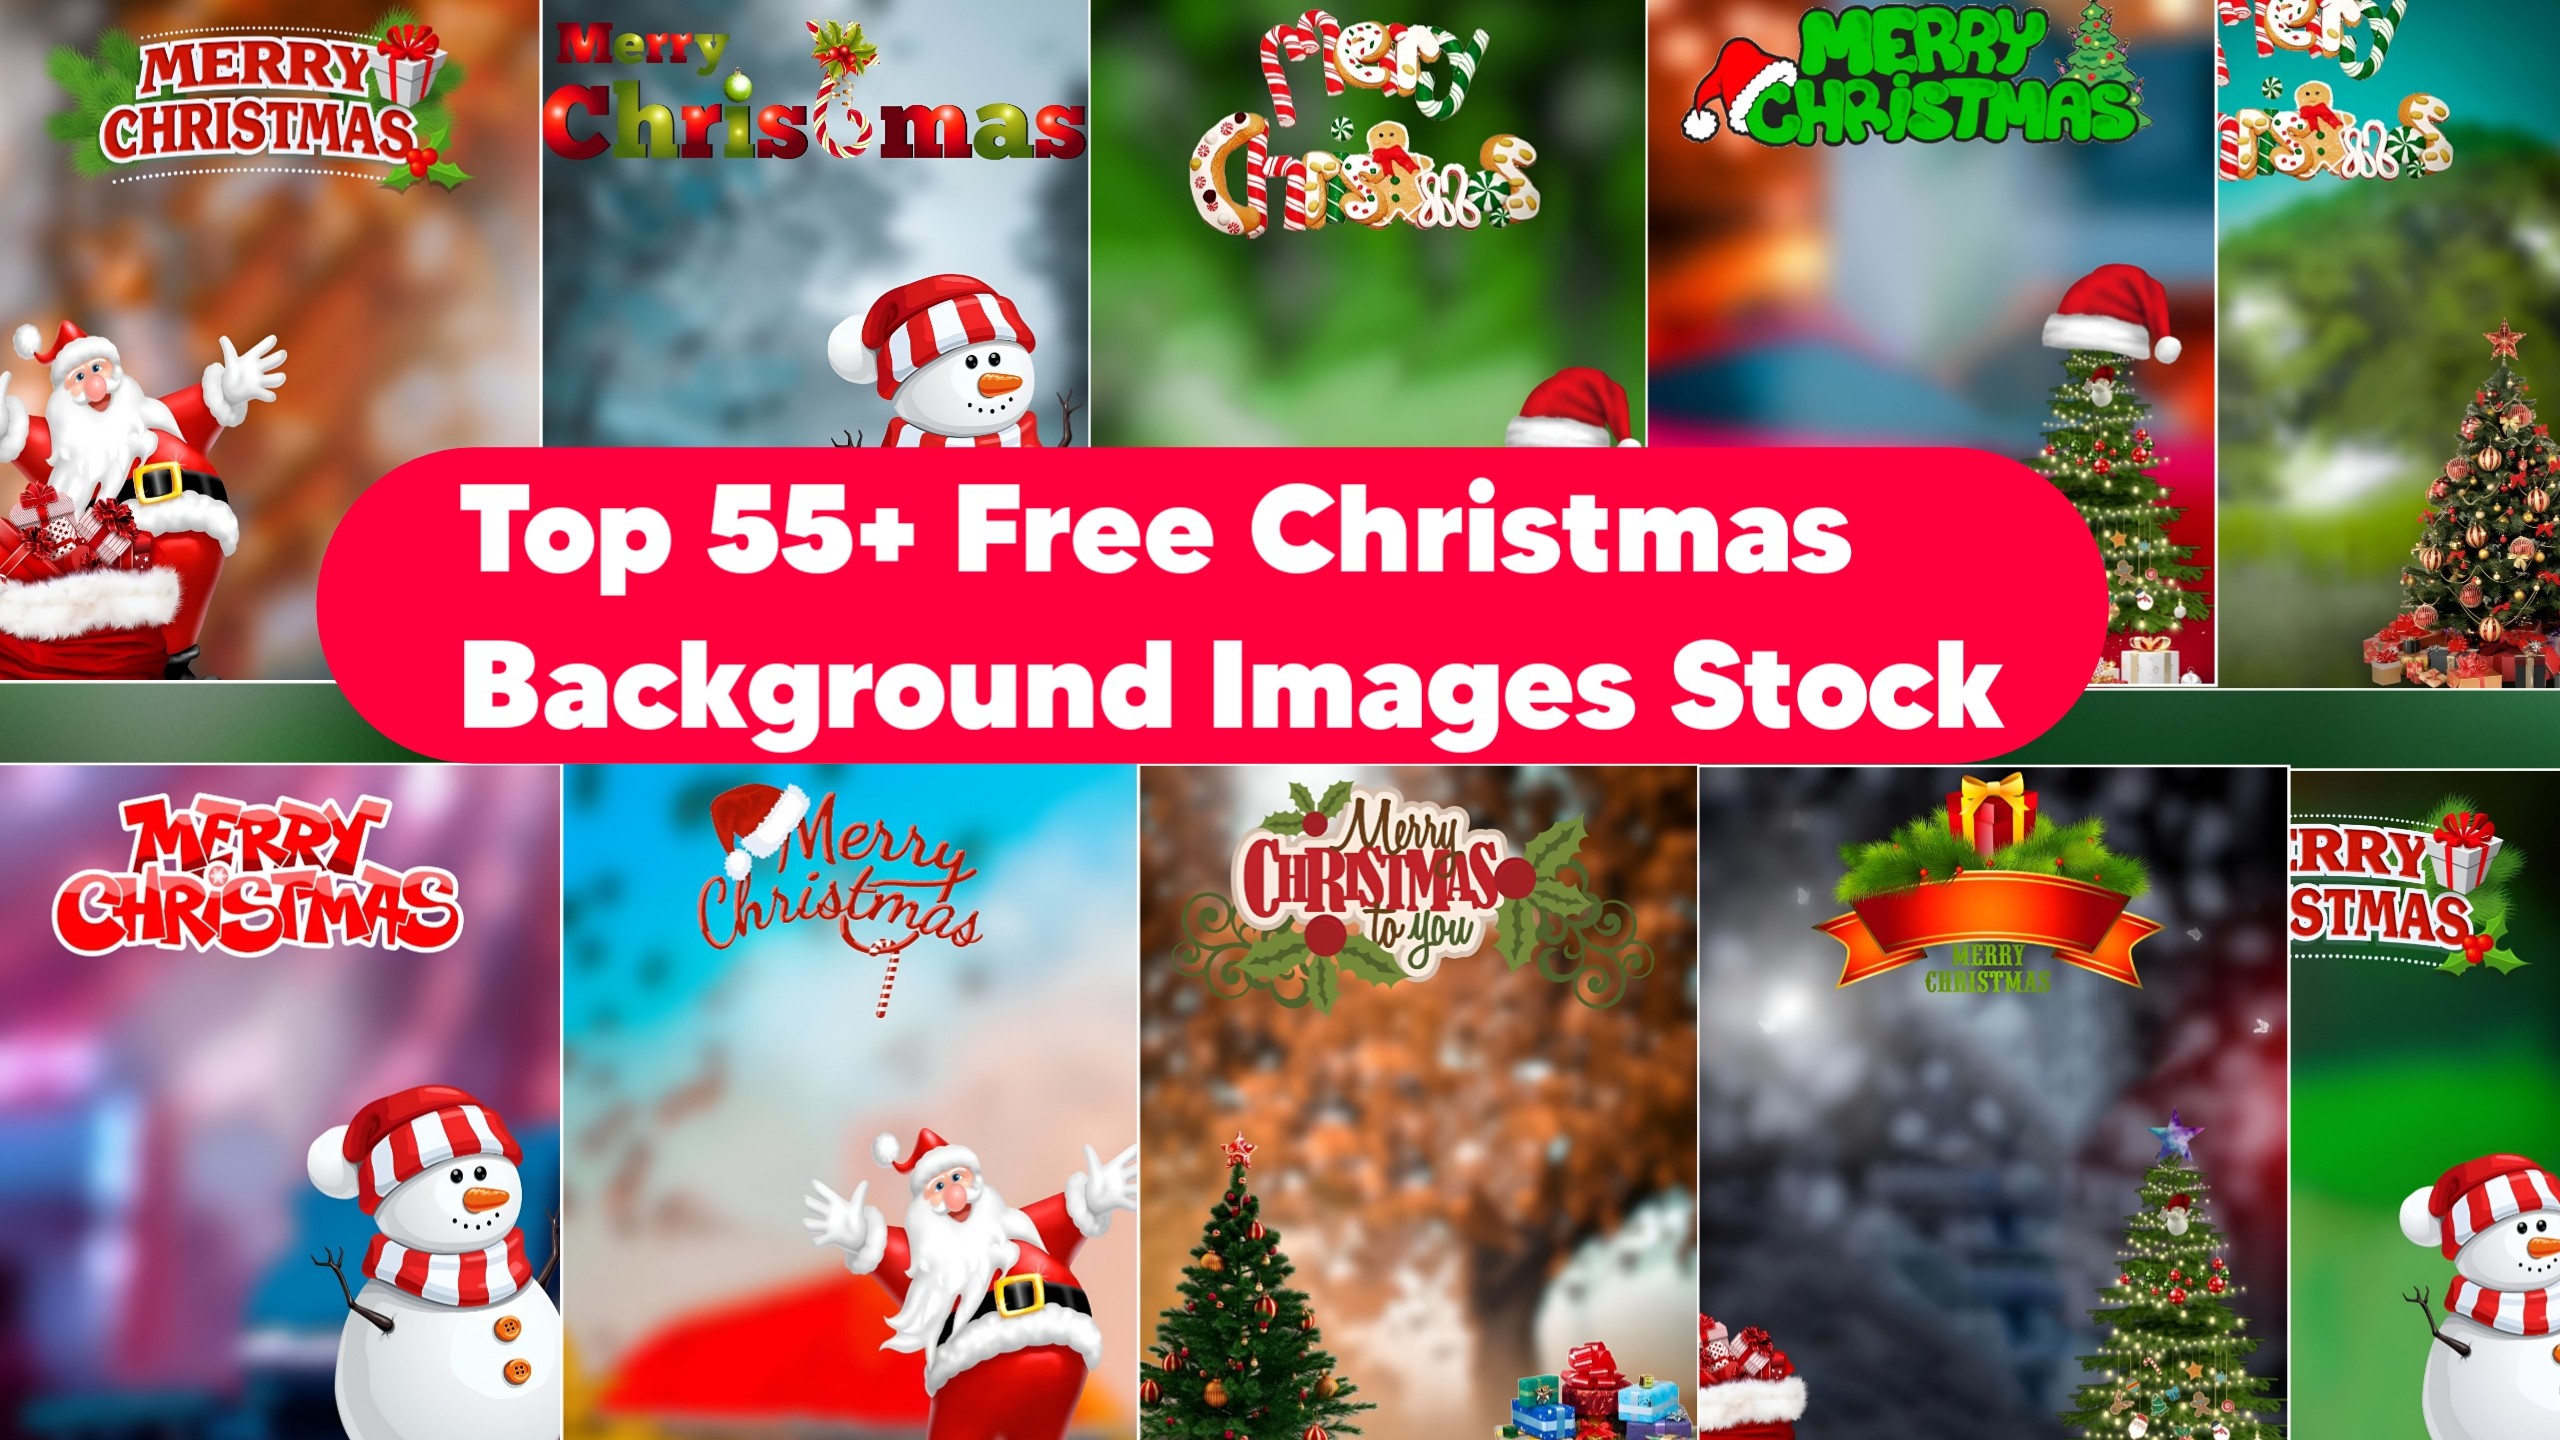 Top 55+ Free Christmas Background Images Stock